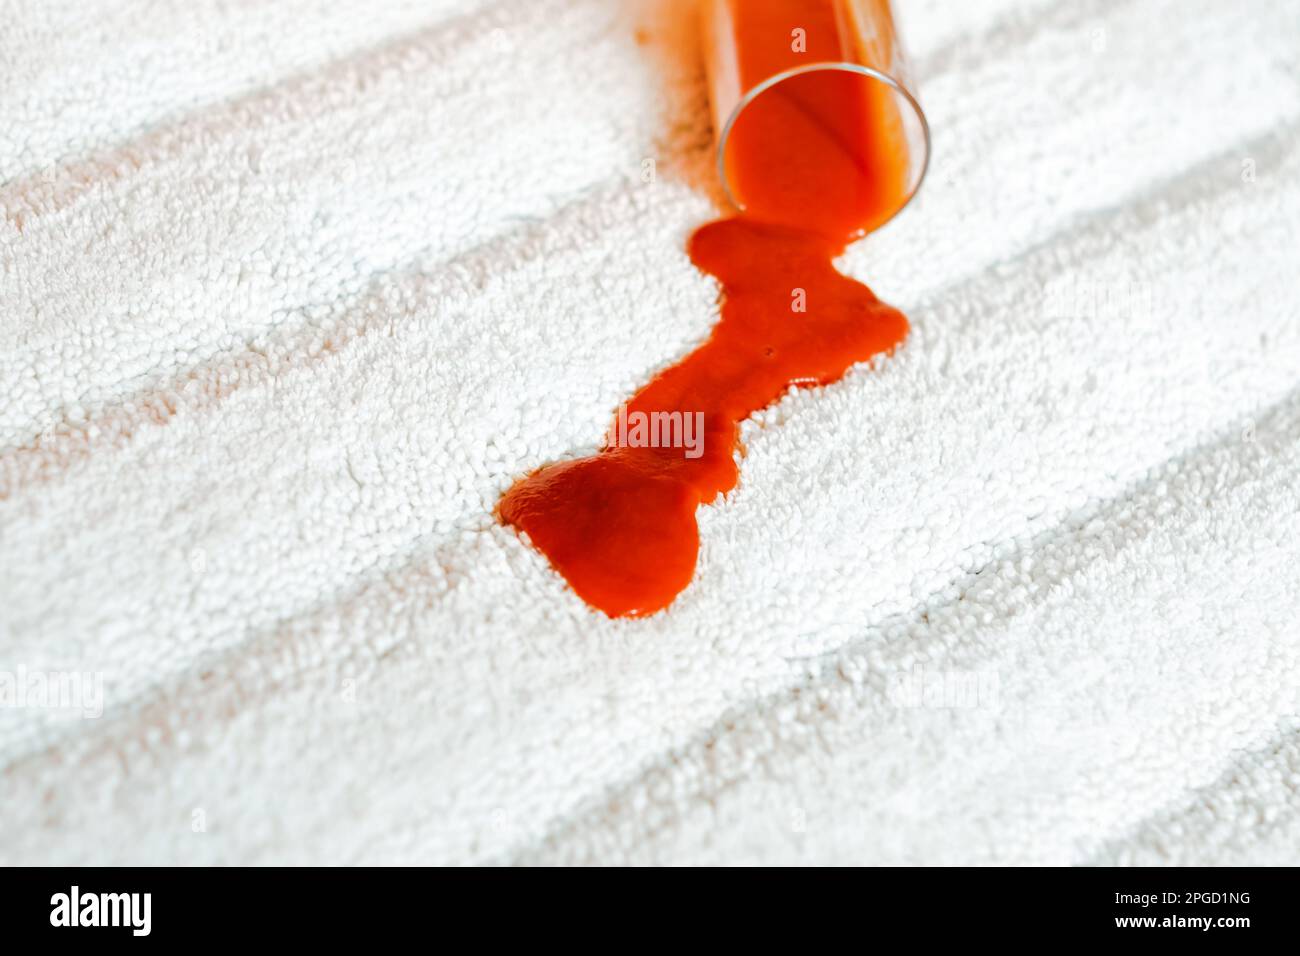 Pouring red juice a glass on a white carpet indoors. closeup. top view. daily life stain concep Stock Photo